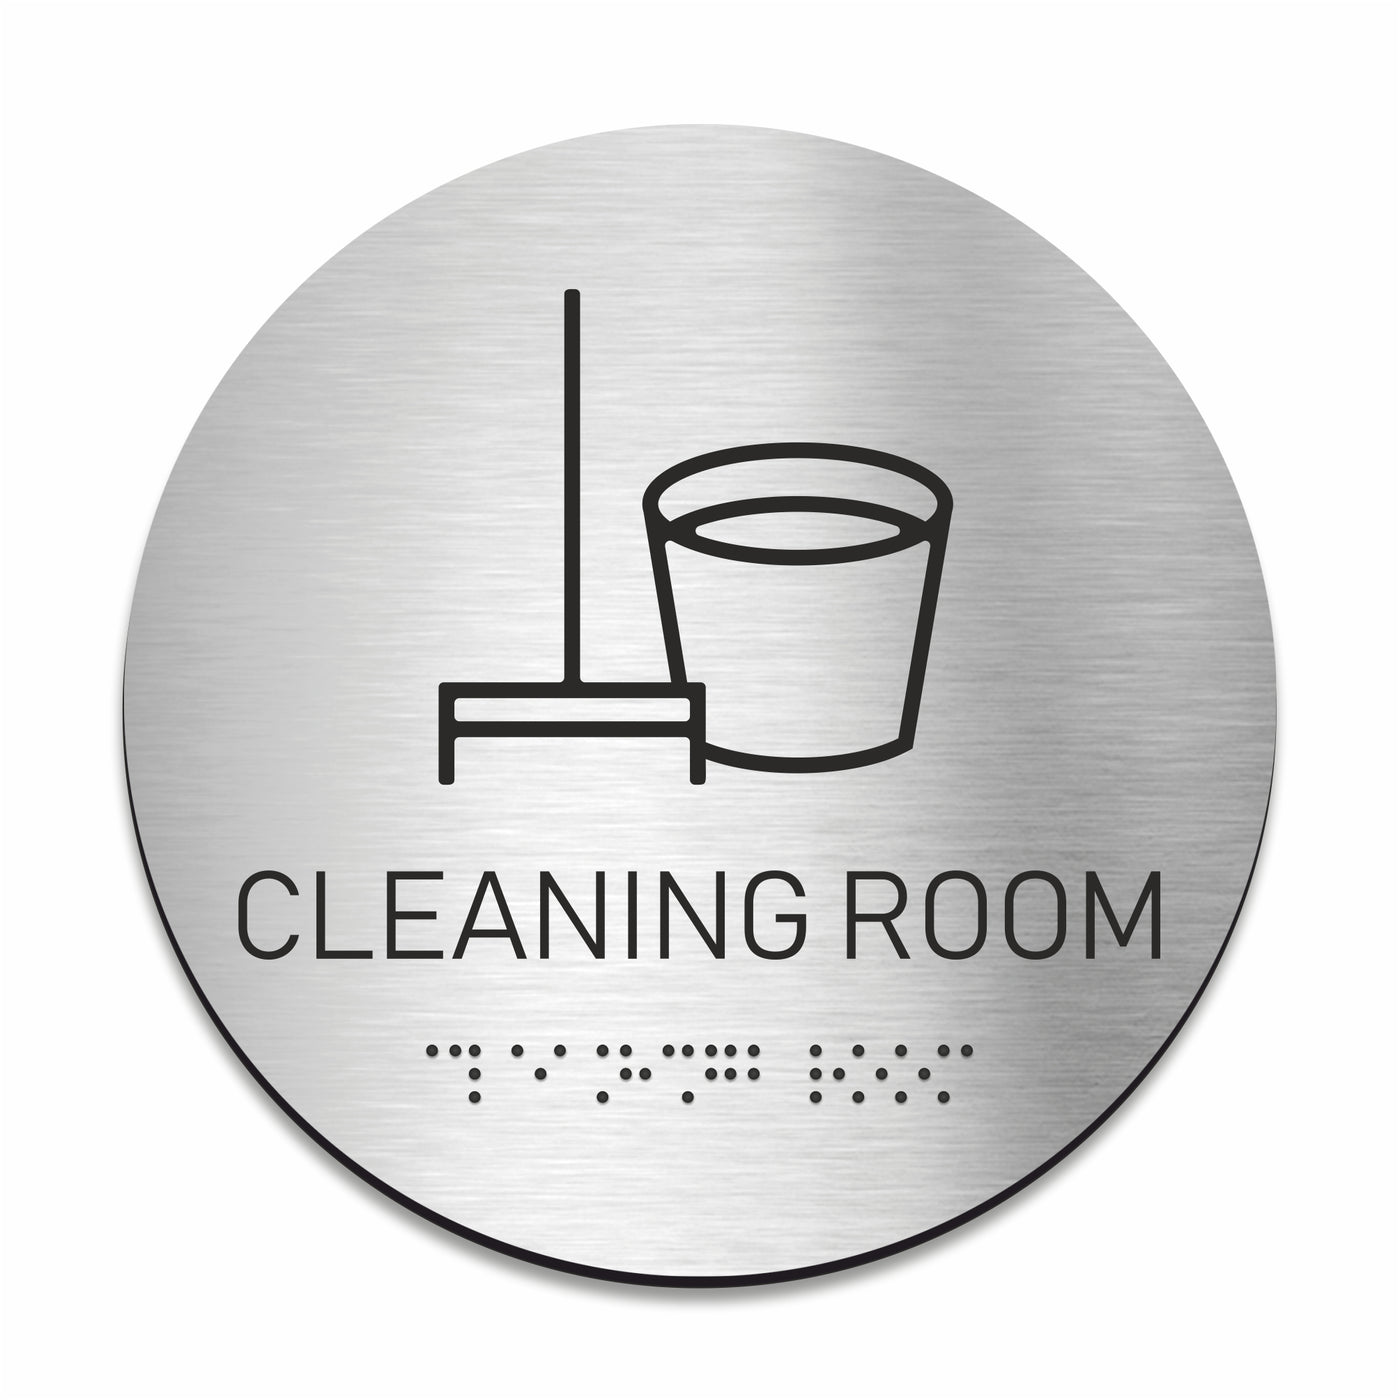 Stainless Steel Cleaning Room Sign with Braille